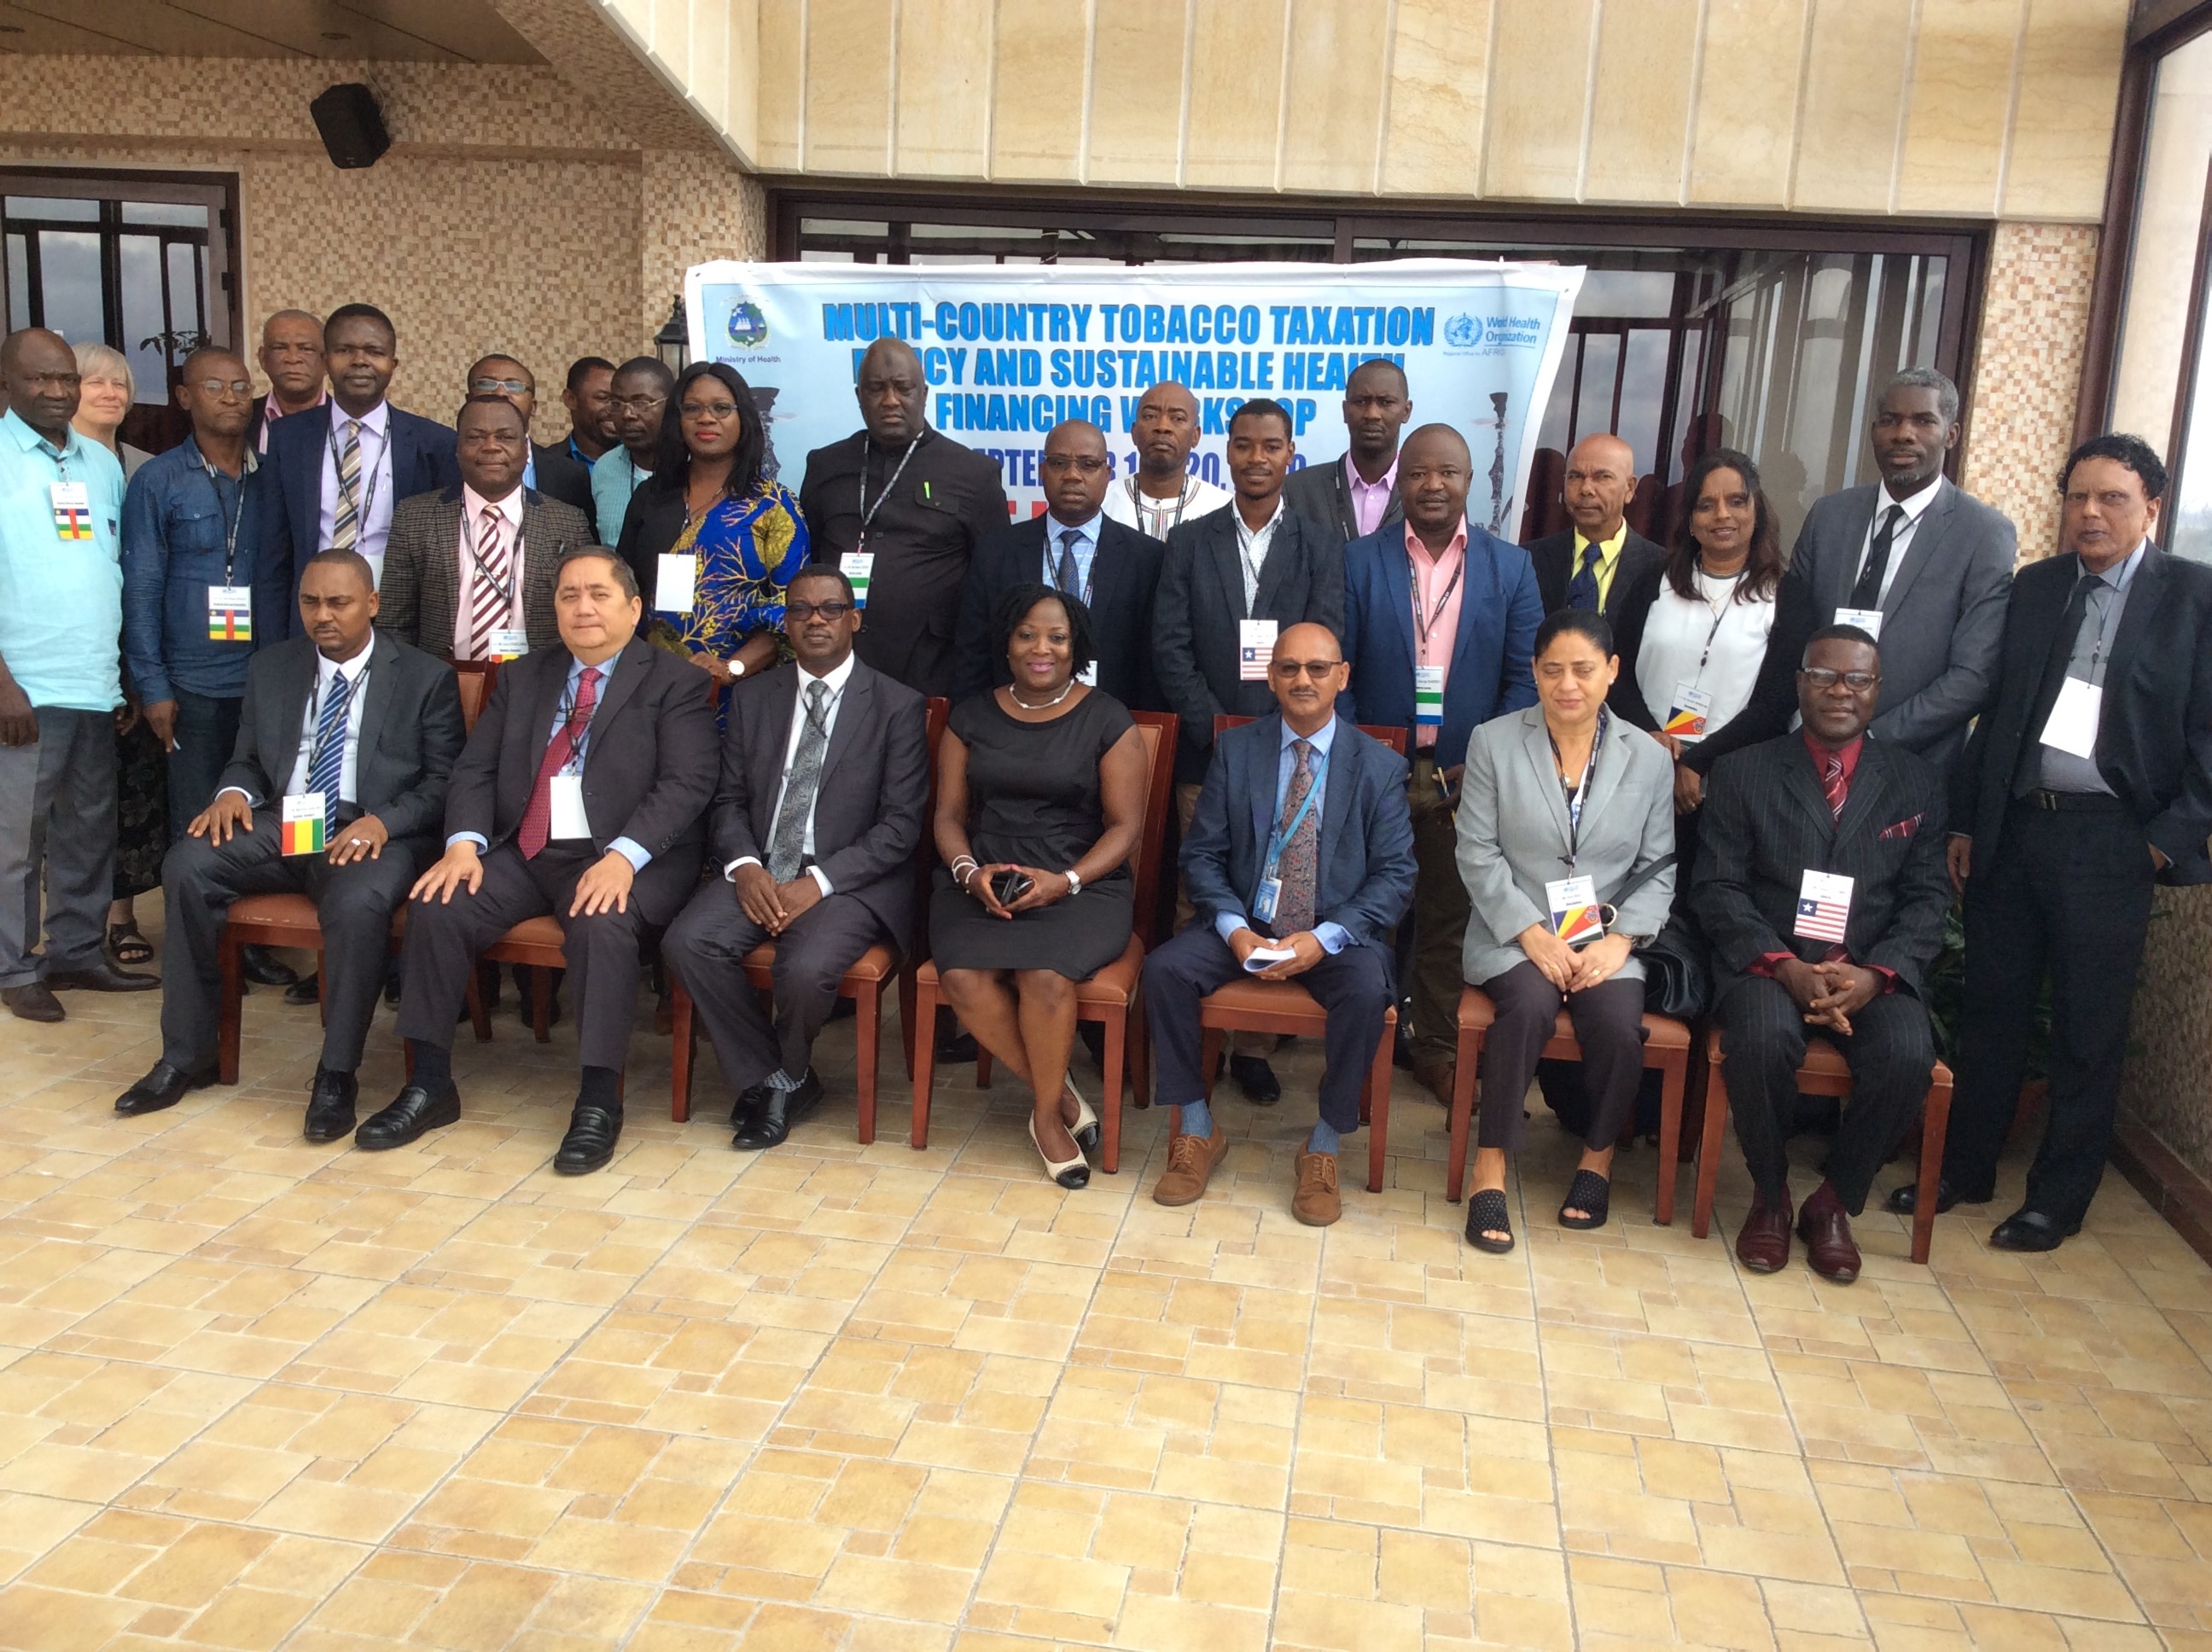 Group photo of participants at the Tobacco Taxation Policy and Sustainable Health Financing Workshop in Monrovia, Liberia